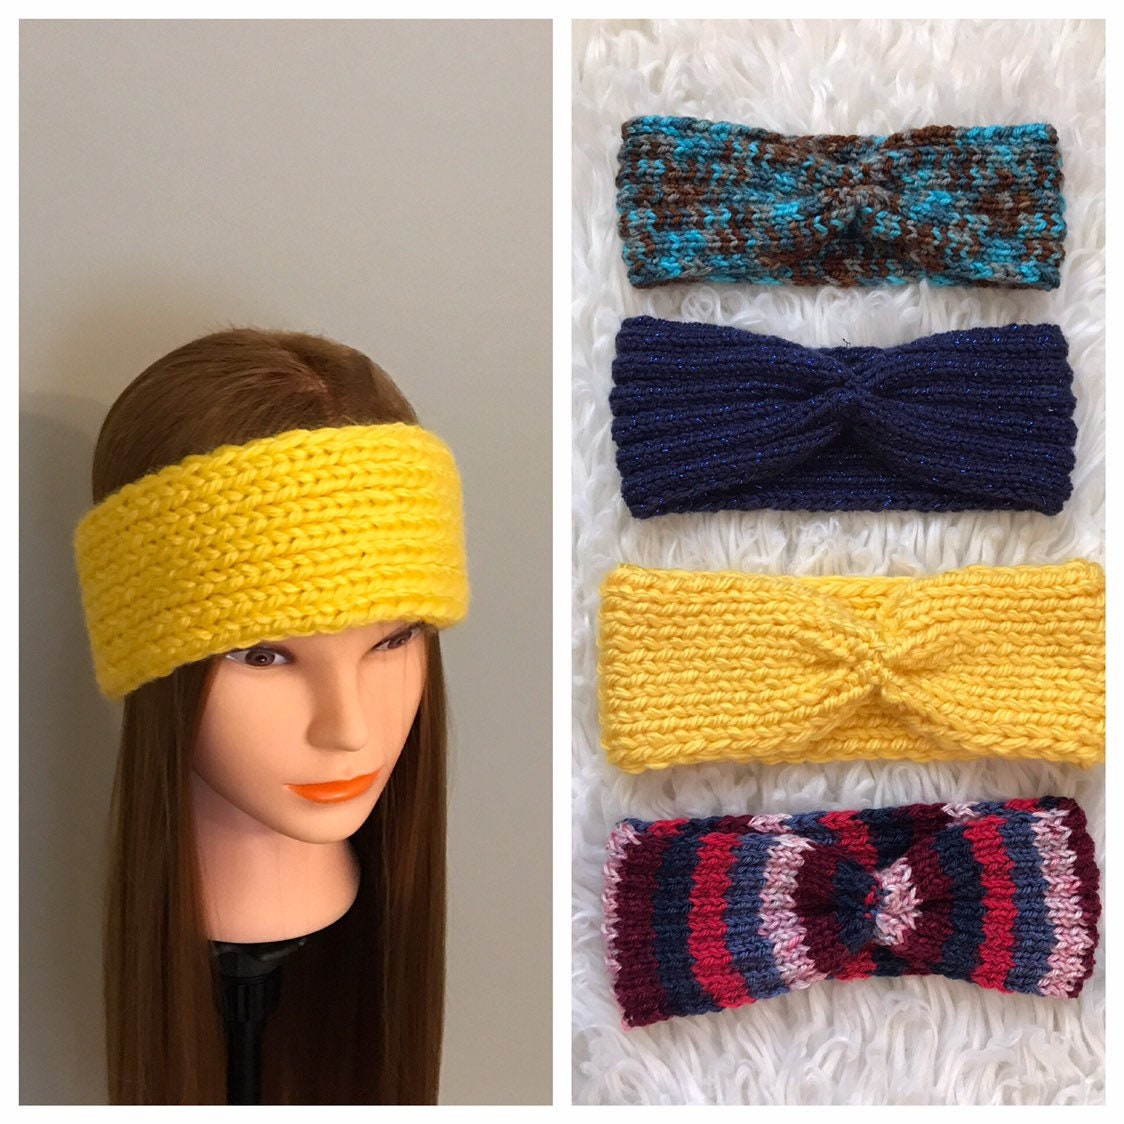 turban headbands for girls warm headbands Knitted headbands Fefesuniquedesign gift for her free shipping